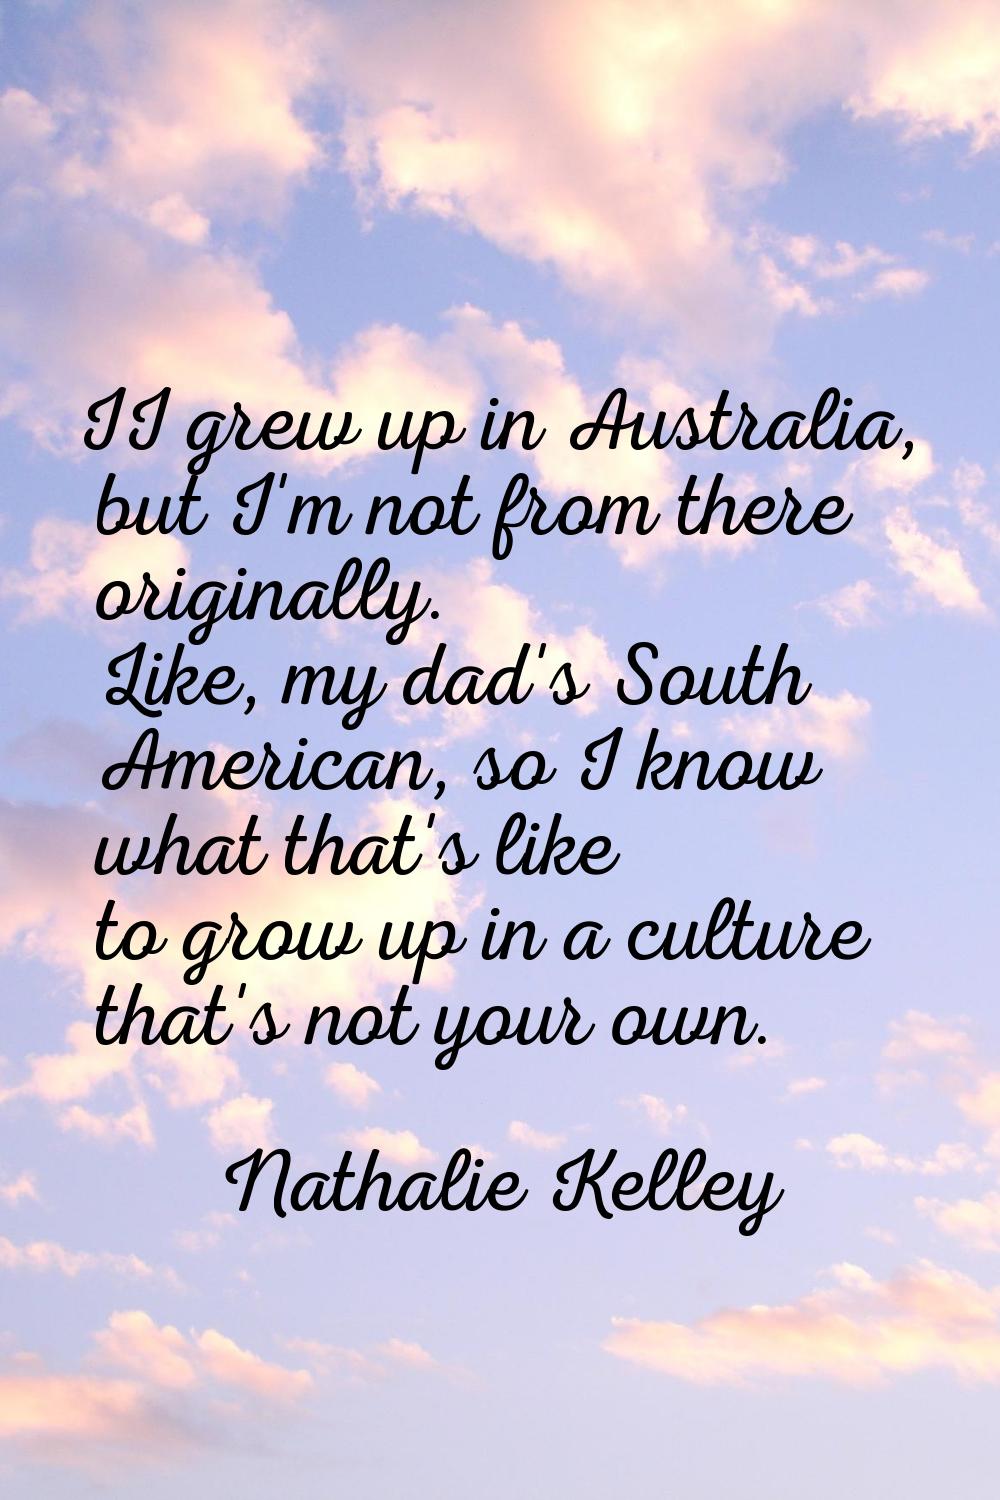 II grew up in Australia, but I'm not from there originally. Like, my dad's South American, so I kno